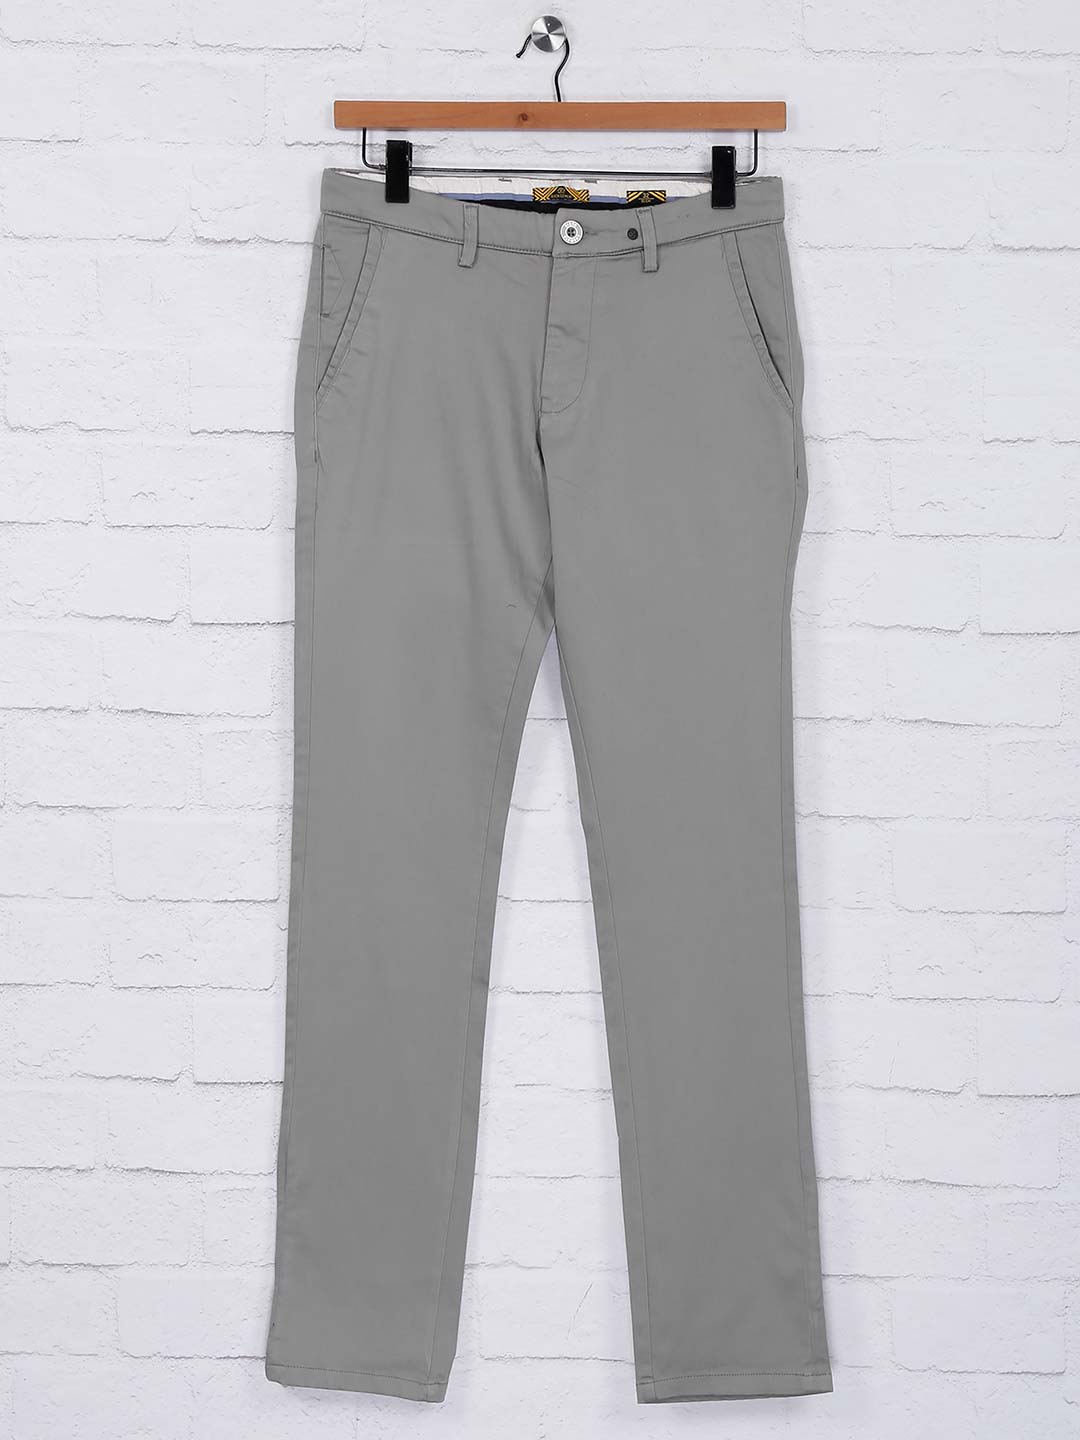 Buy Men Grey Slim Fit Textured Flat Front Formal Trousers Online - 695324 |  Louis Philippe